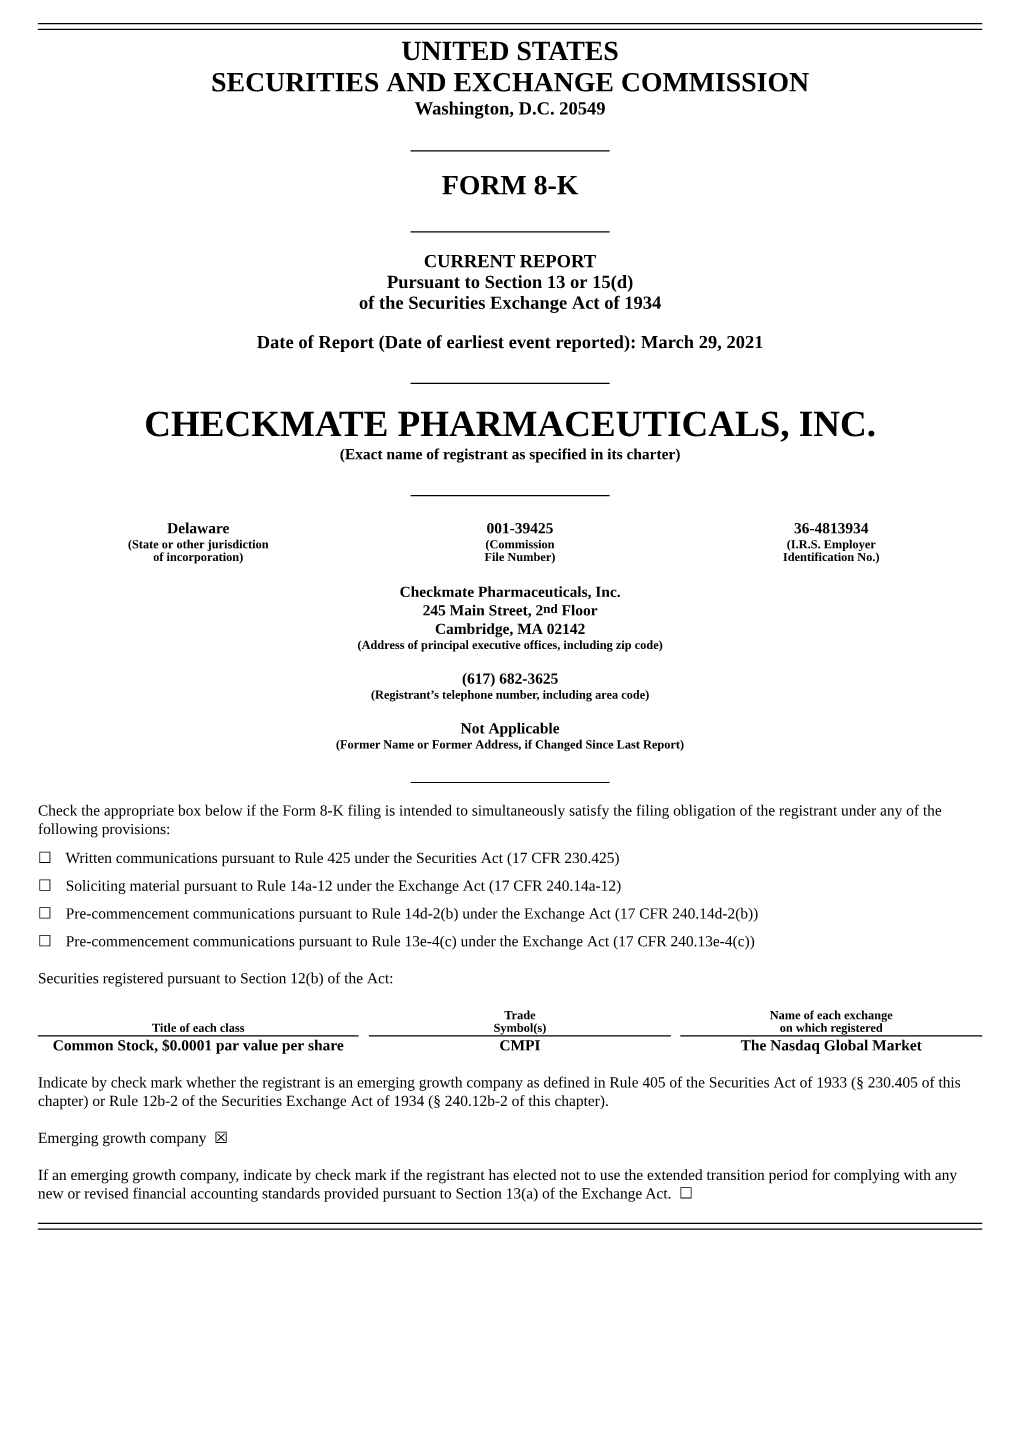 CHECKMATE PHARMACEUTICALS, INC. (Exact Name of Registrant As Specified in Its Charter)